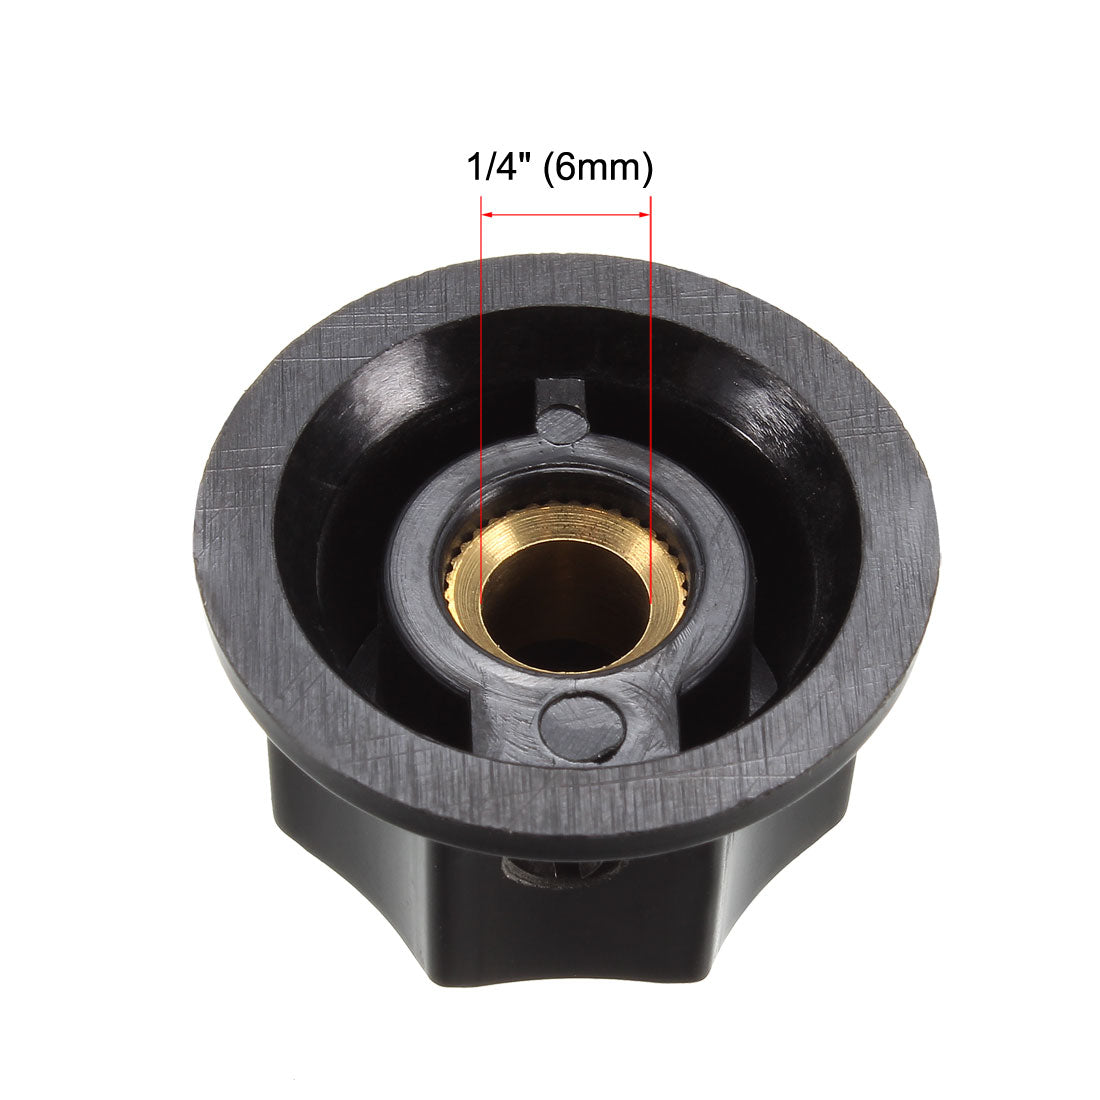 uxcell Uxcell 2Pcs Speaker Control Knob Power Amplifier Knob 27mm Dia. Rotary Knobs for 6mm Dia. Shaft Potentiometer